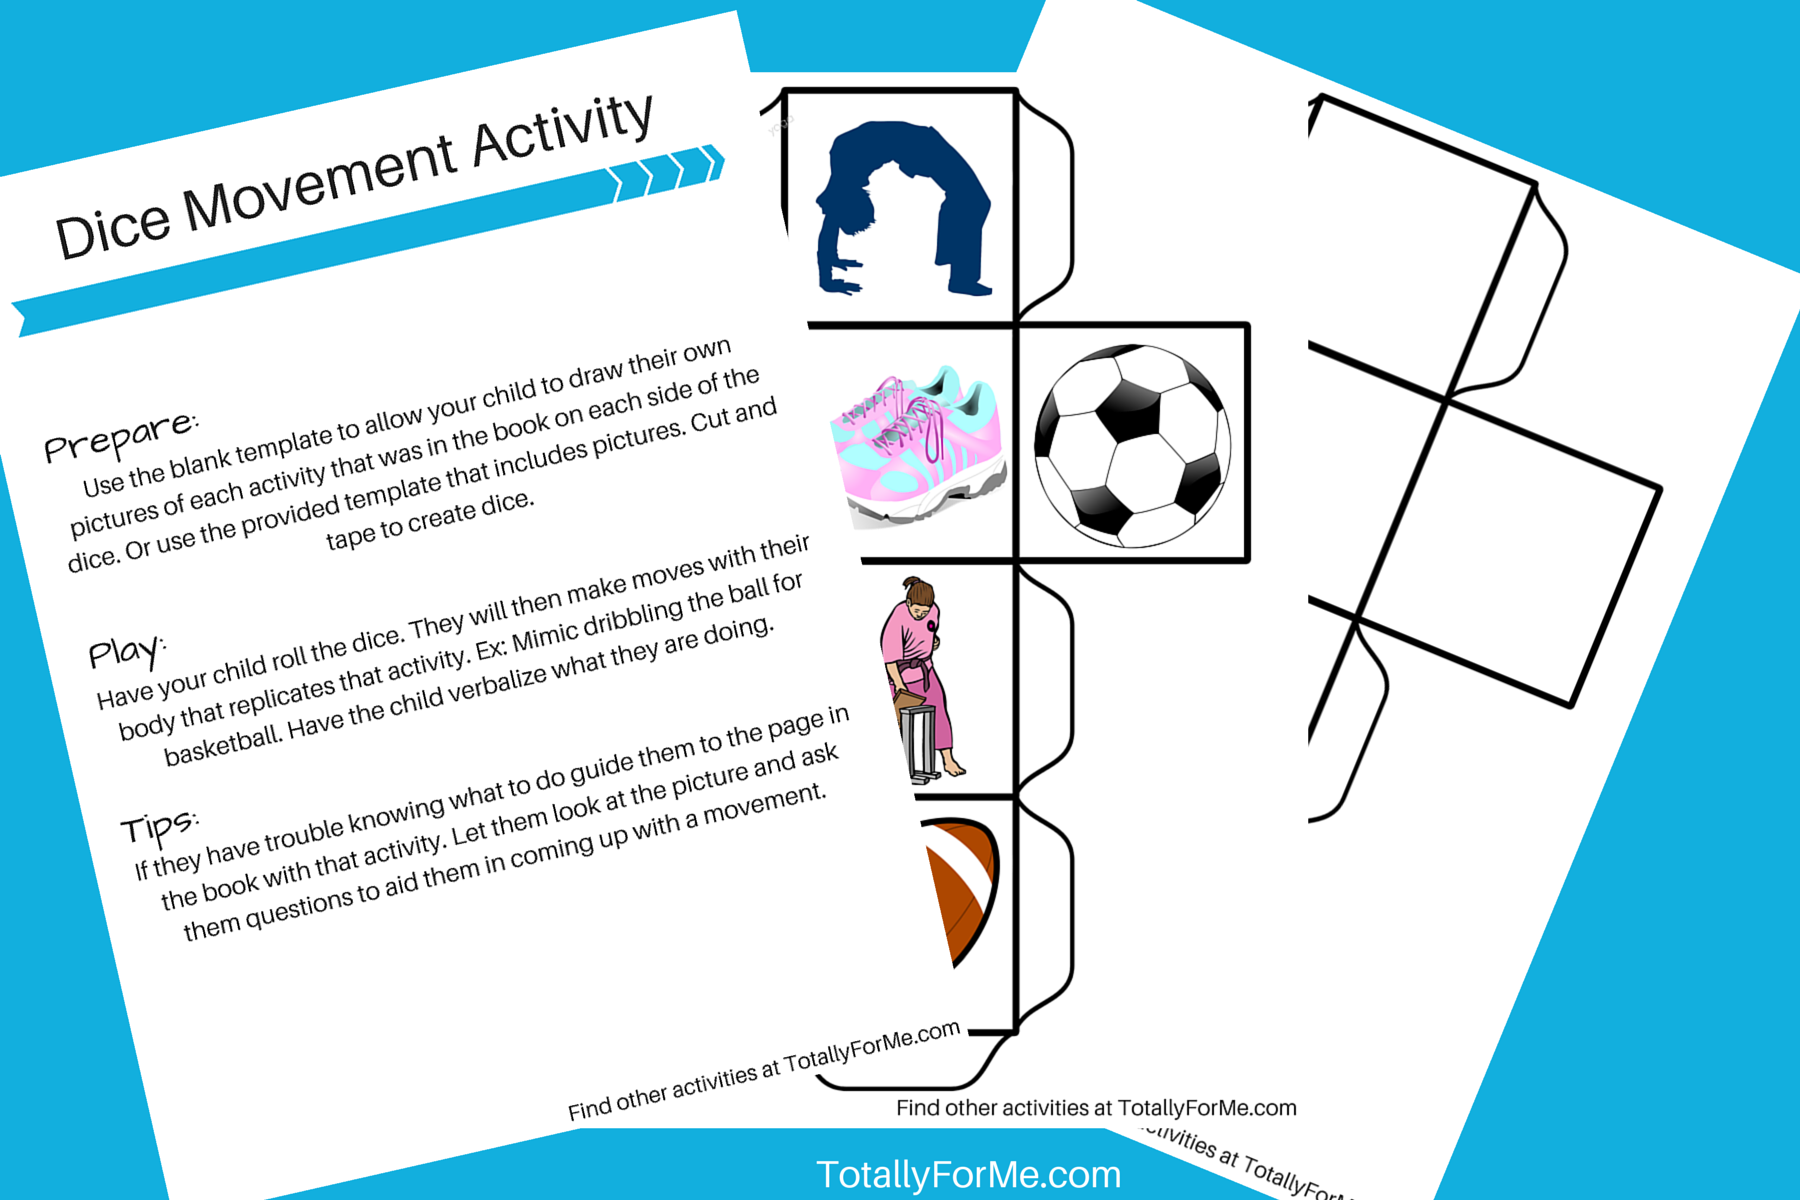 Dice movement sports activities for kids who are non readers.